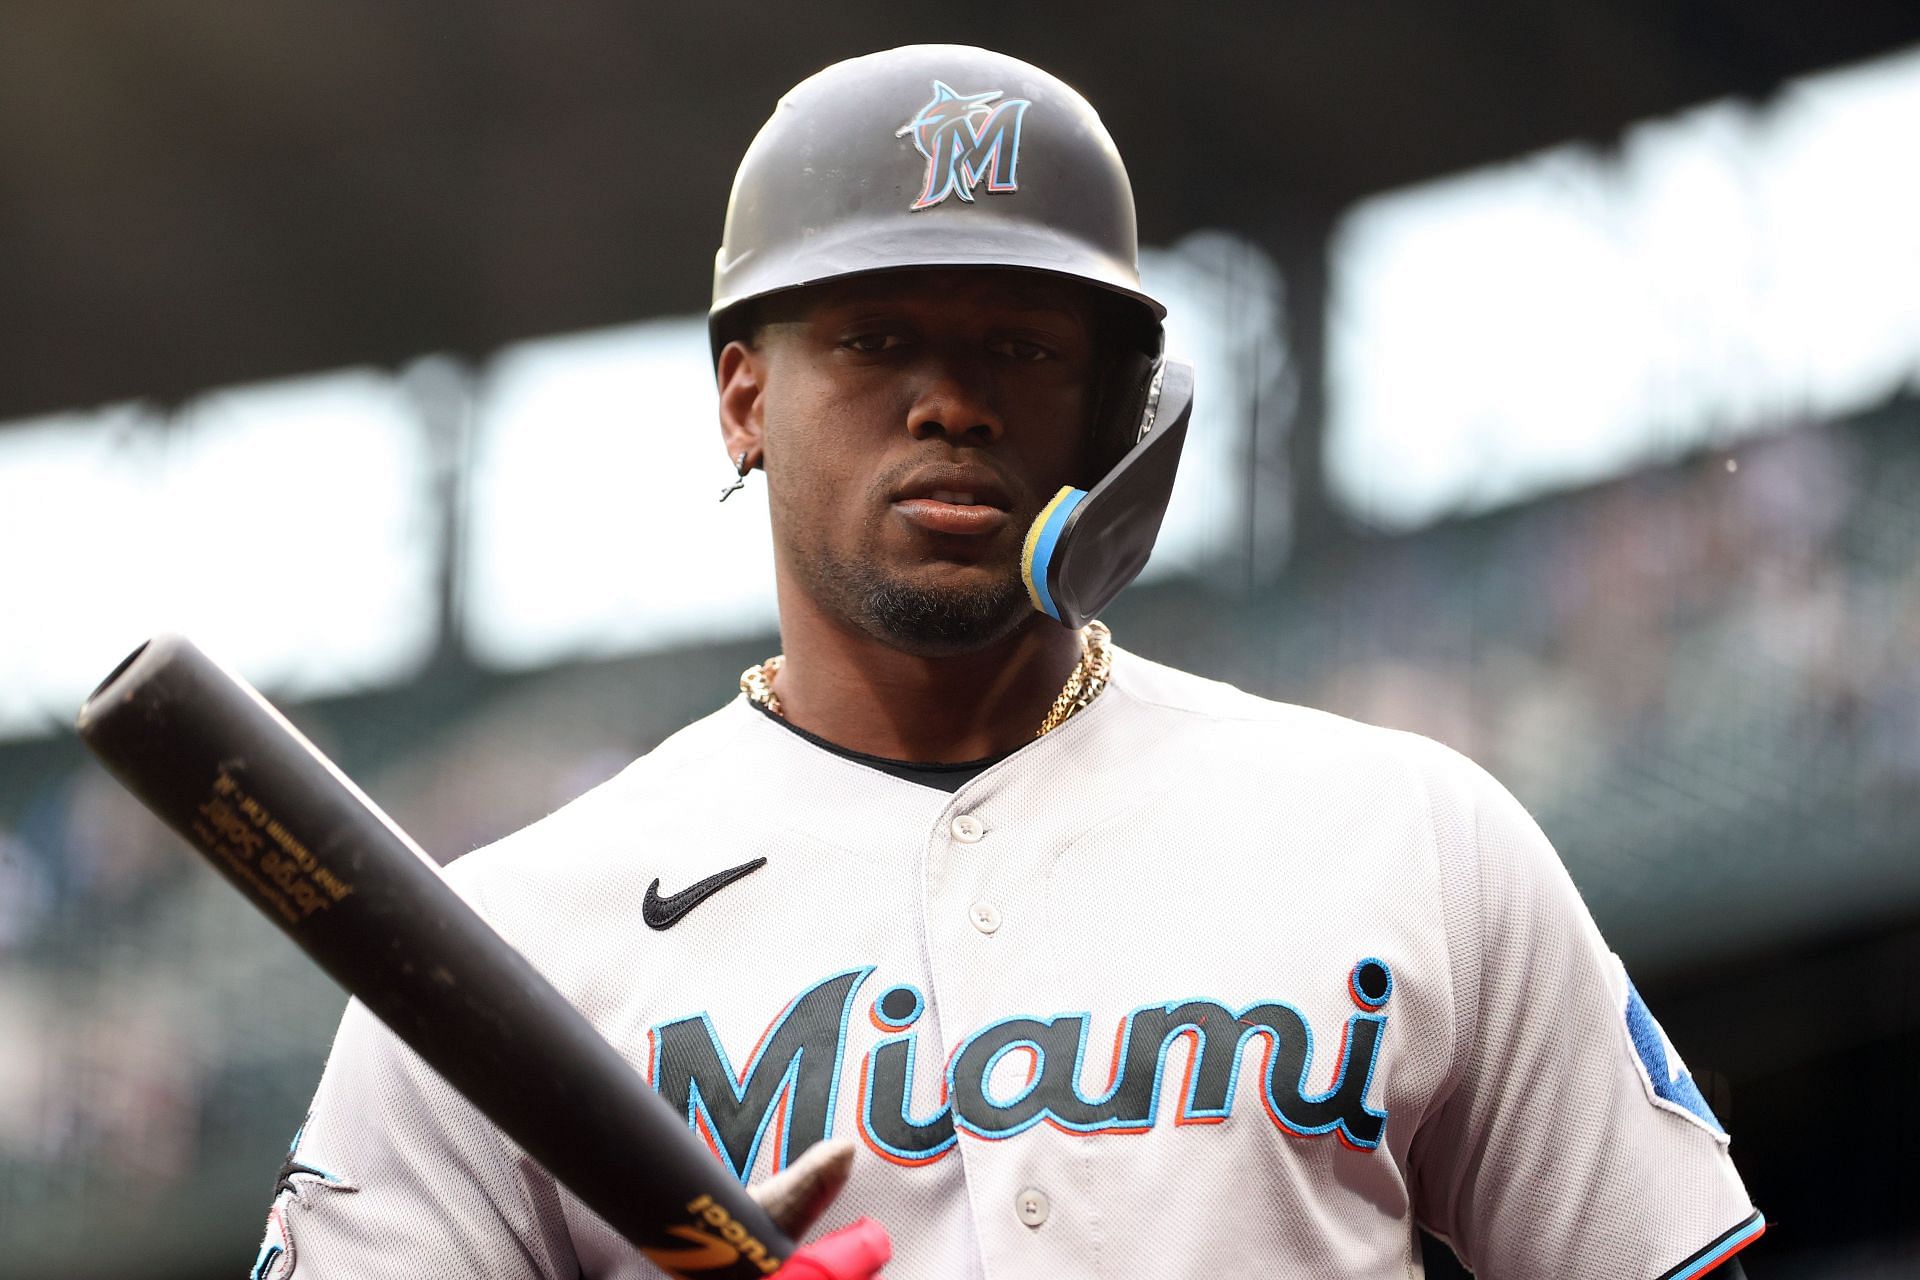 Miami Marlins slugger Jorge Soler could mean runs and power to the Astros.